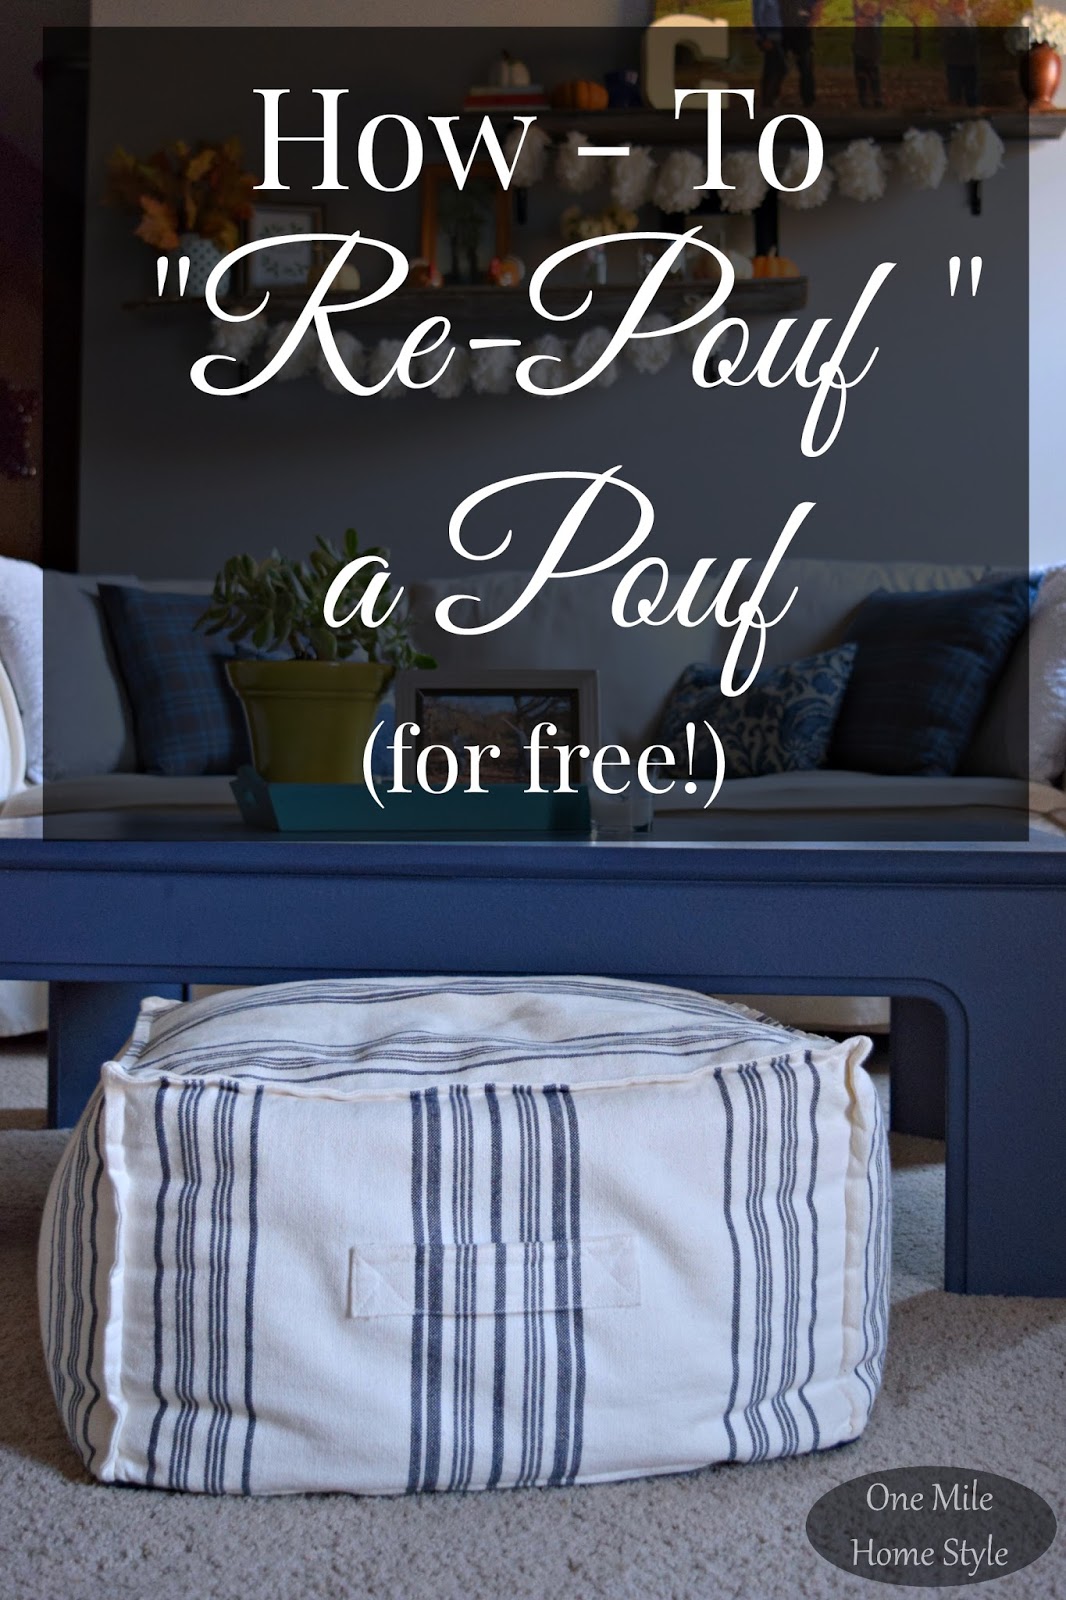 How To Re-Pouf A Pouf (For Free!)